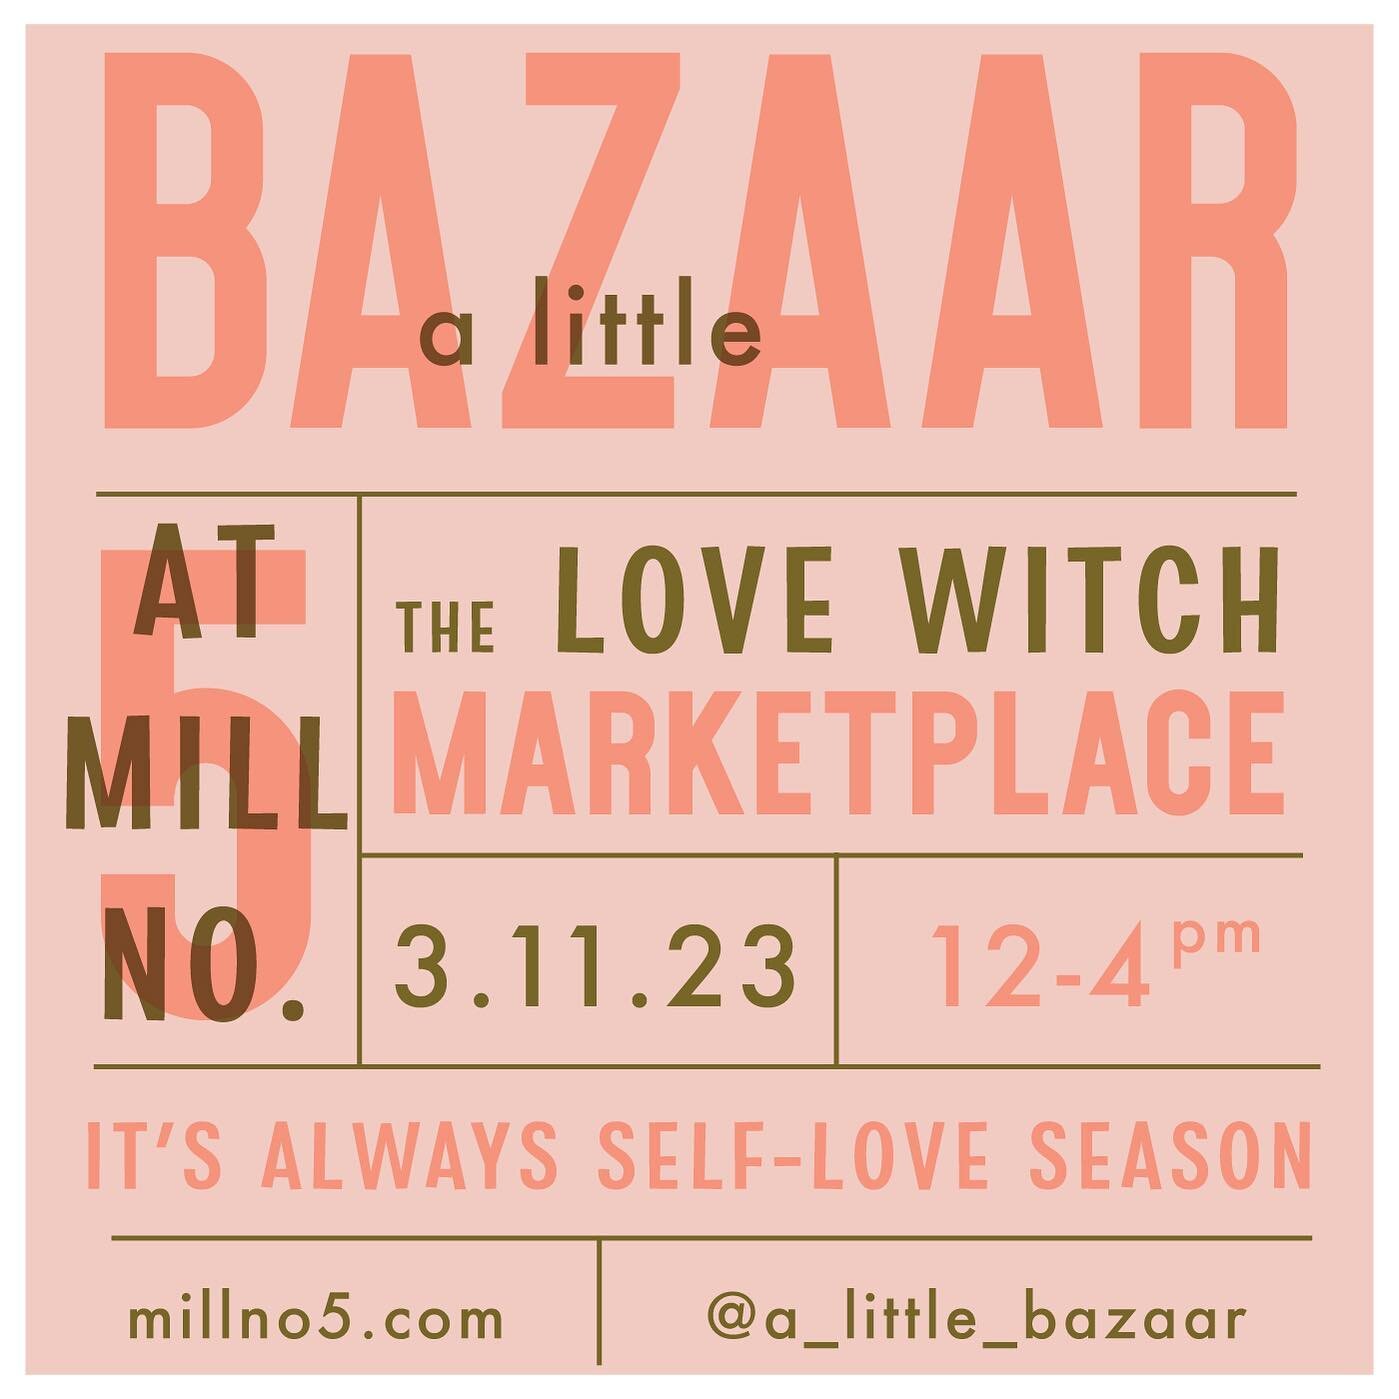 Third try&rsquo;s the charm! 🤞🏻

The weather looks like a GO for the market this weekend. Swing by @millno5 for The Love Witch Market p/b @a_little_bazaar, grab a coffee and shop all the local businesses!